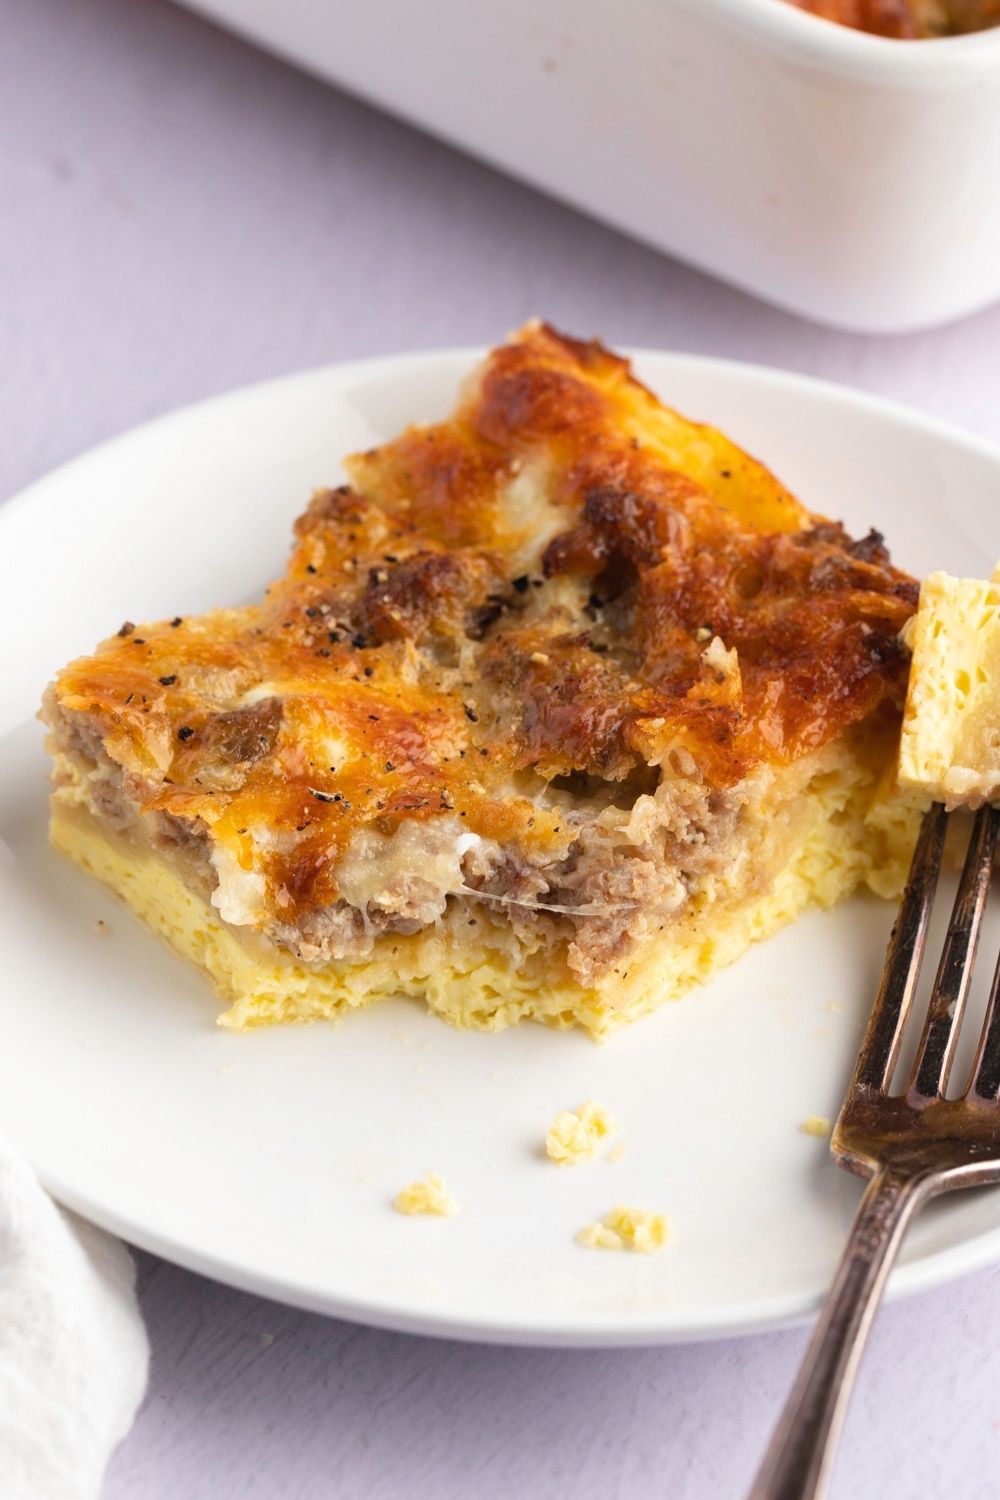 A Slice of Crescent Roll Breakfast Casserole with Ground Pork Sausage and Egg